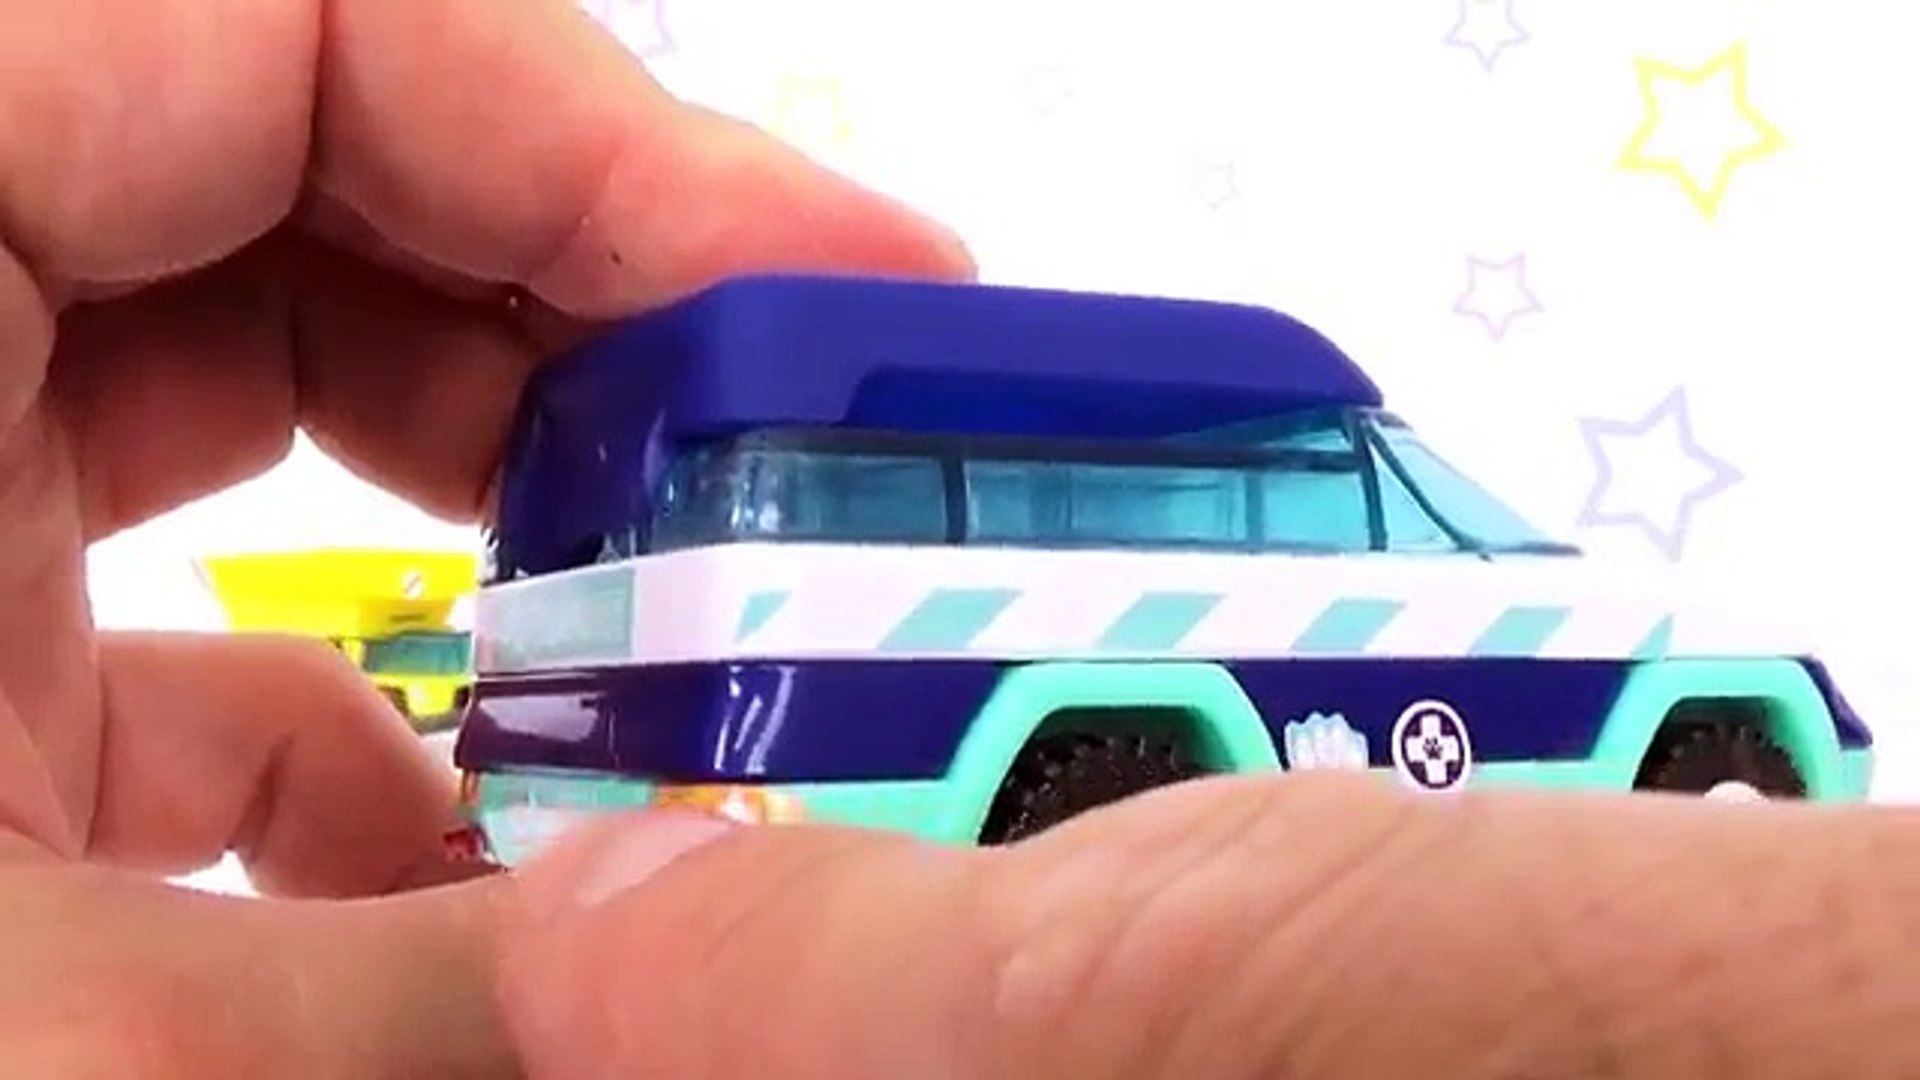 VEHICULES Métiers SET 8 jouets McDONALDS HAPPY MEAL 2016 France Demo review  - video Dailymotion